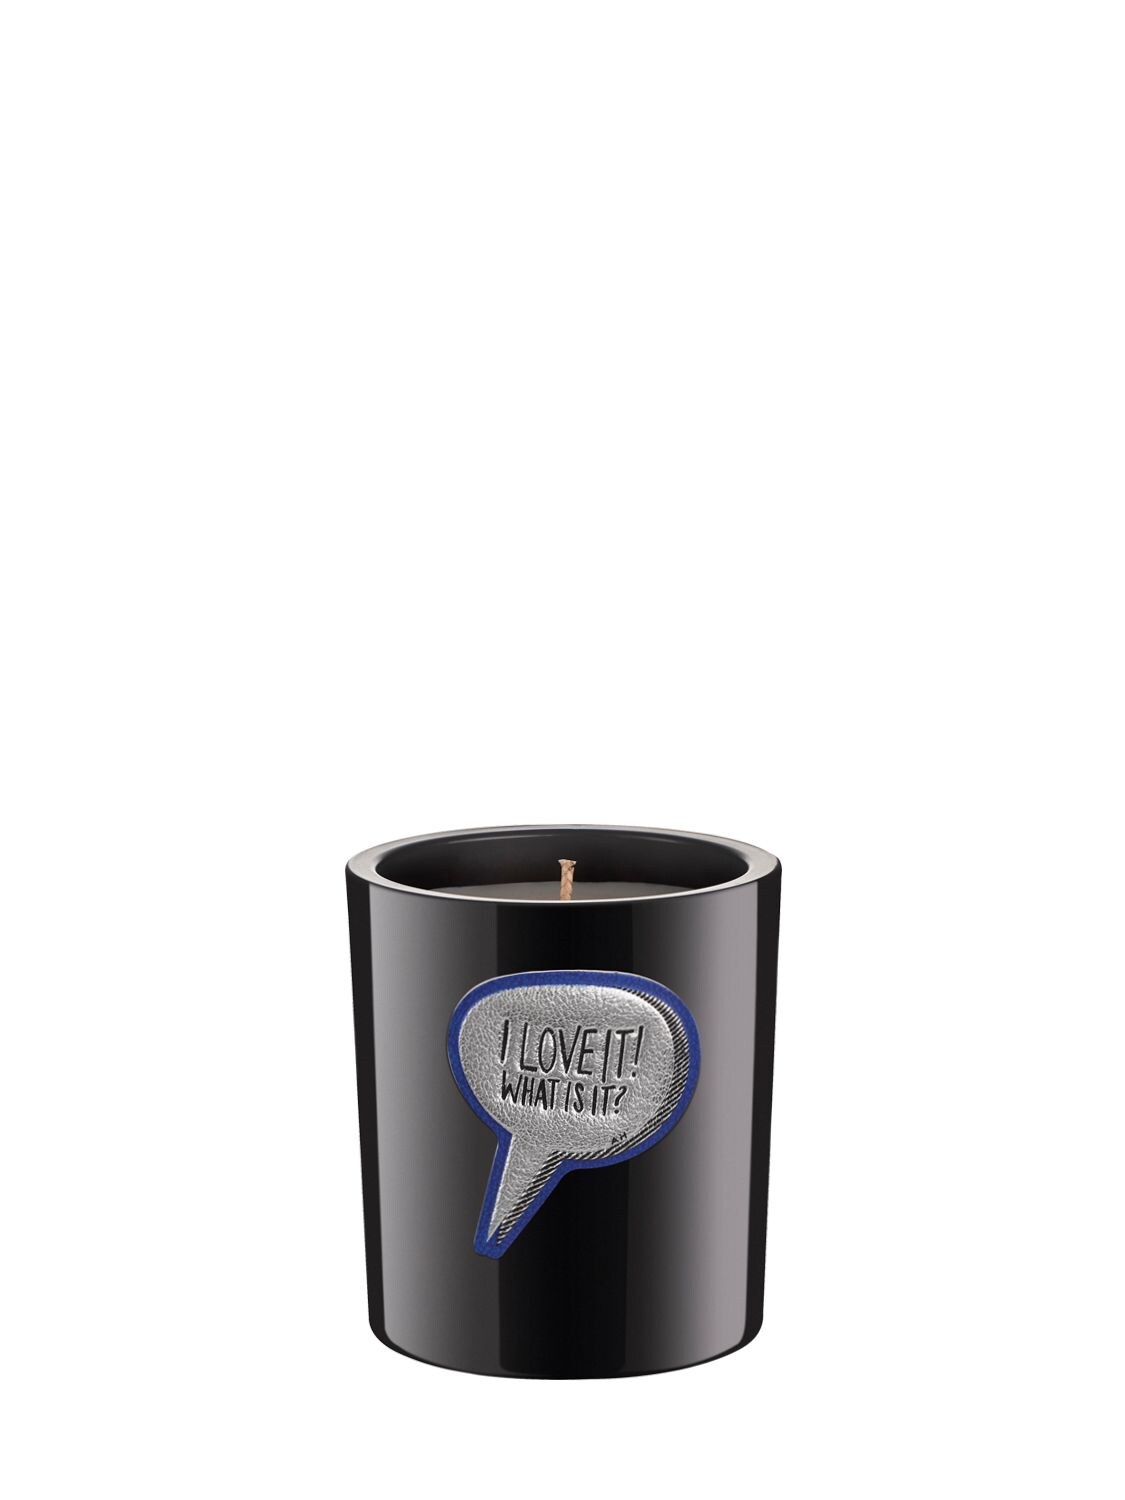 Anya Hindmarch Smells 175gr Baby Powder Scented Candle In Black